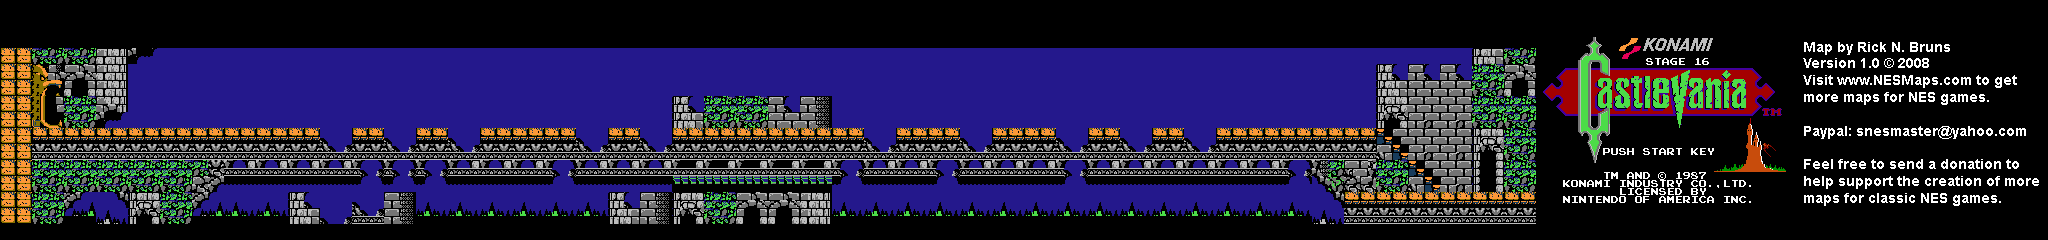 Castlevania - Stage 16 Nintendo NES Background Only Map